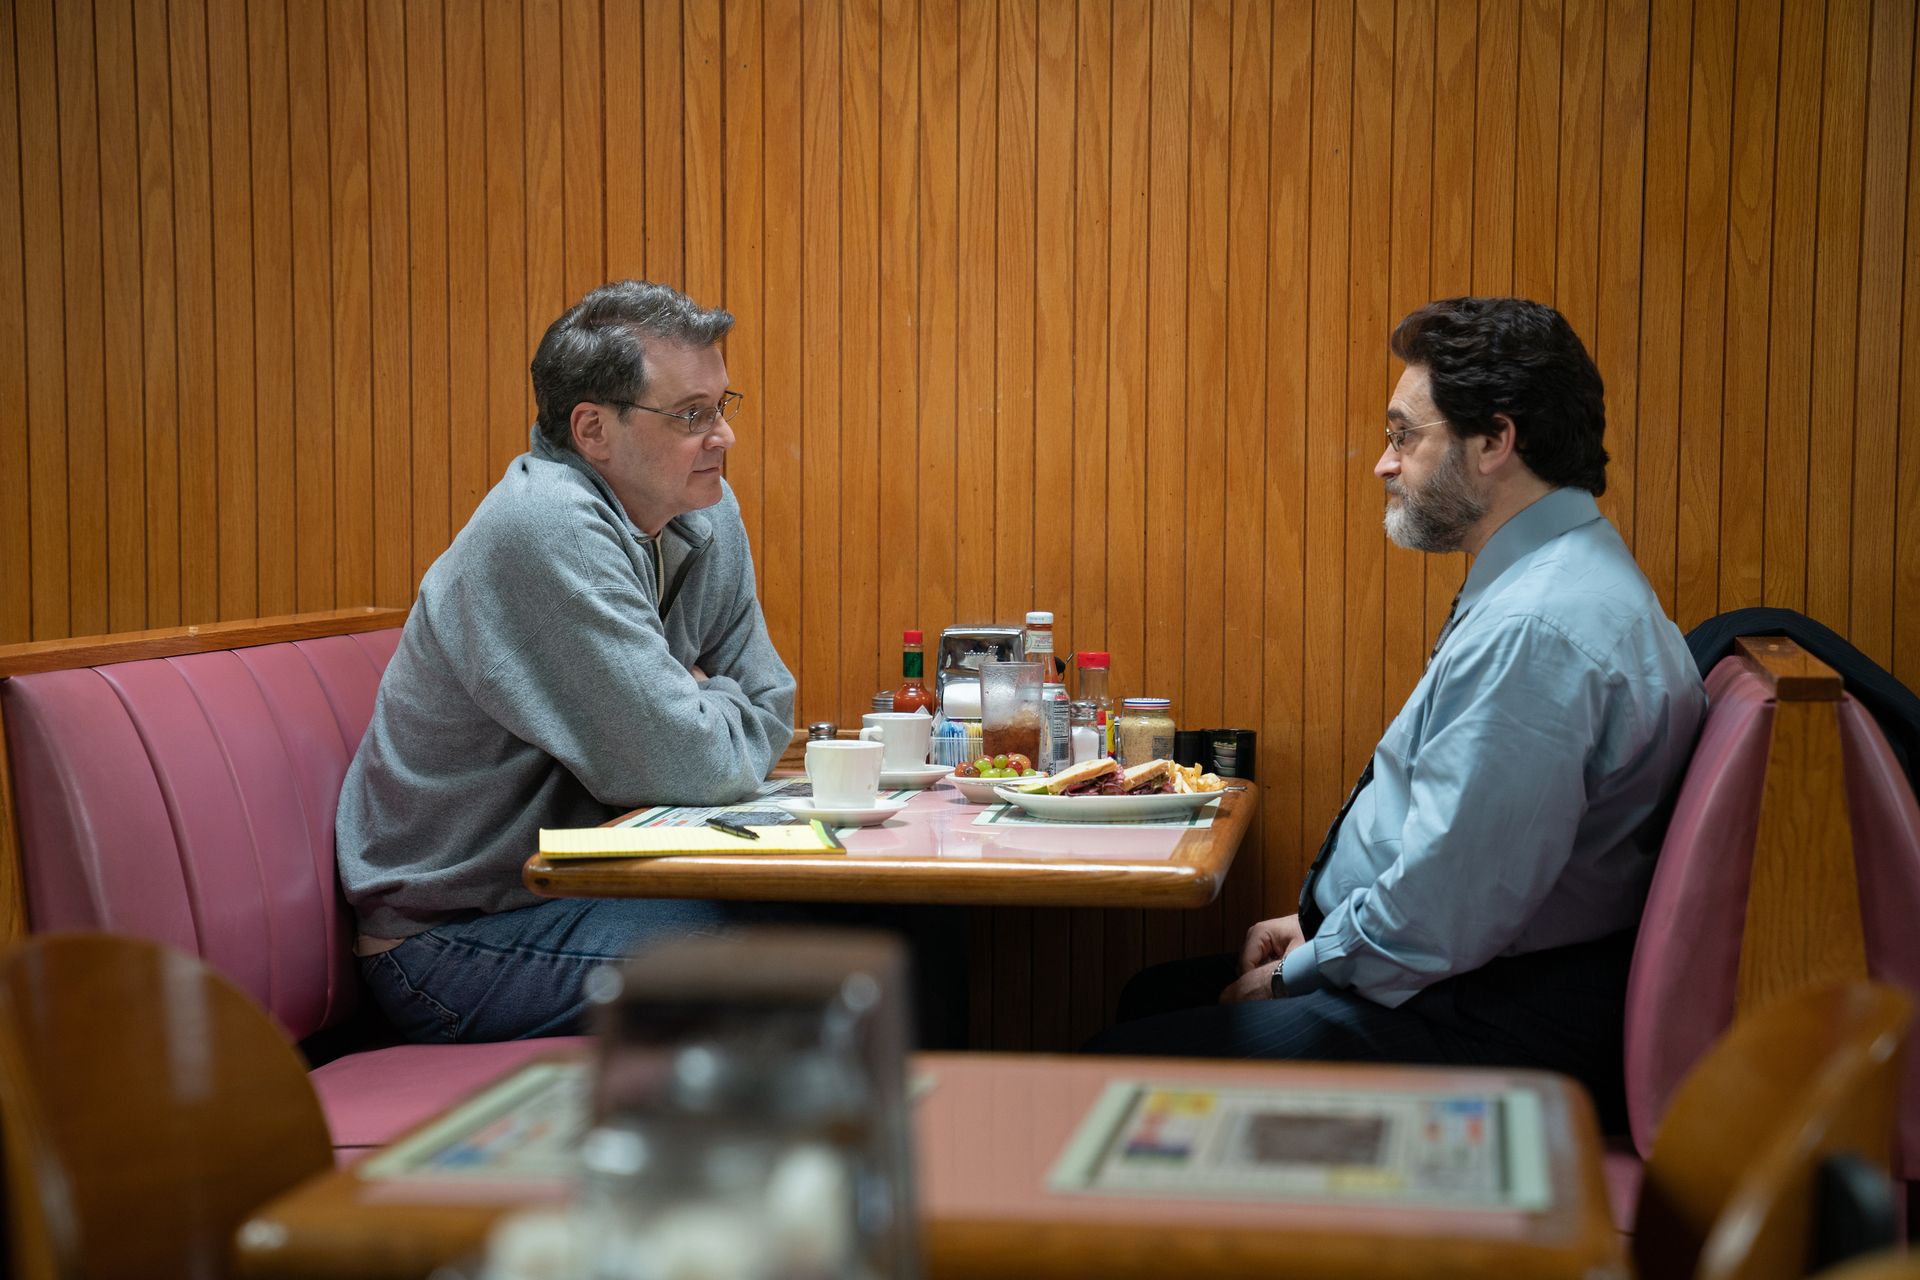 two men sit at a diner table